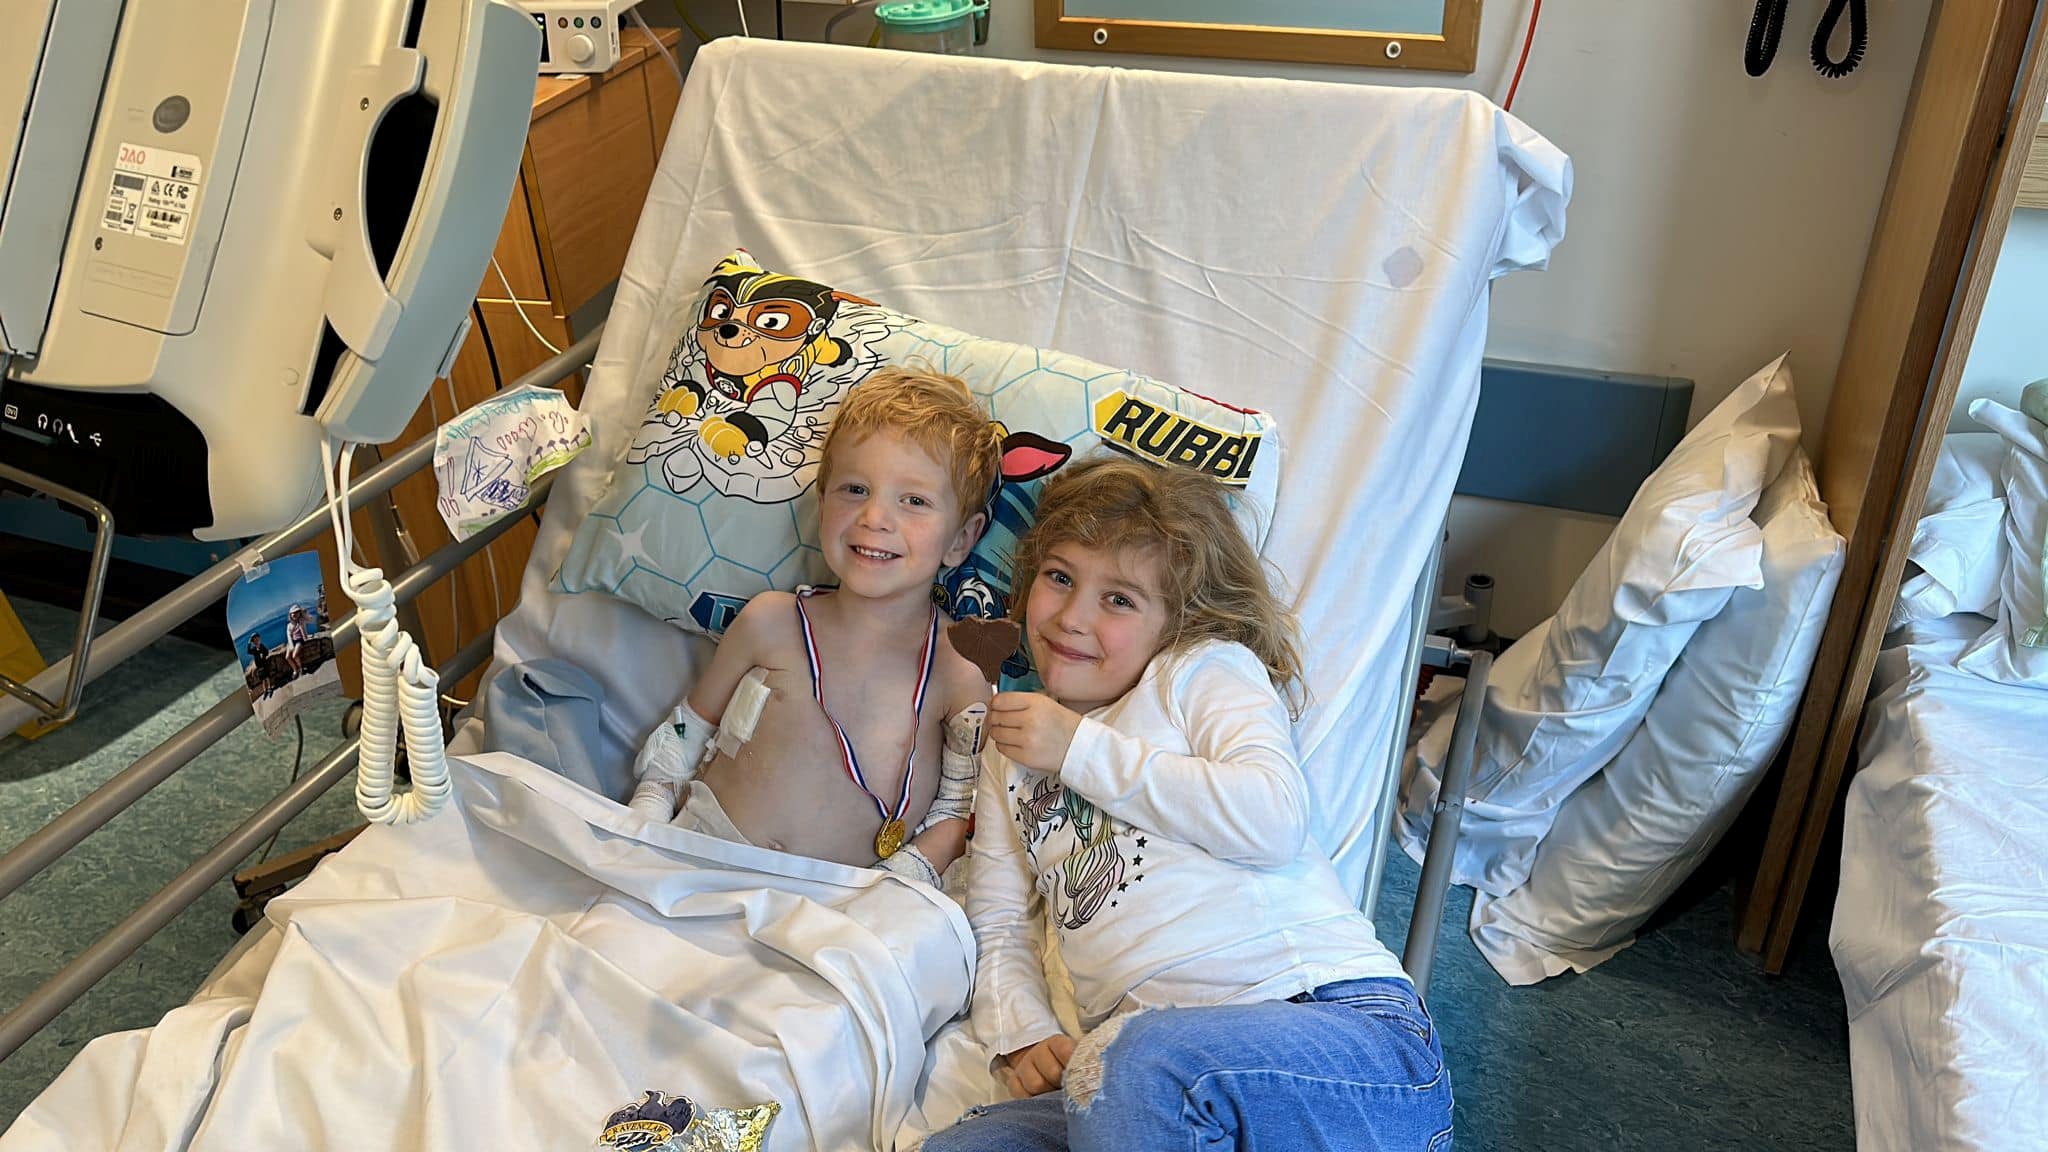 Reuben Damant and his sister Isla together in hospital